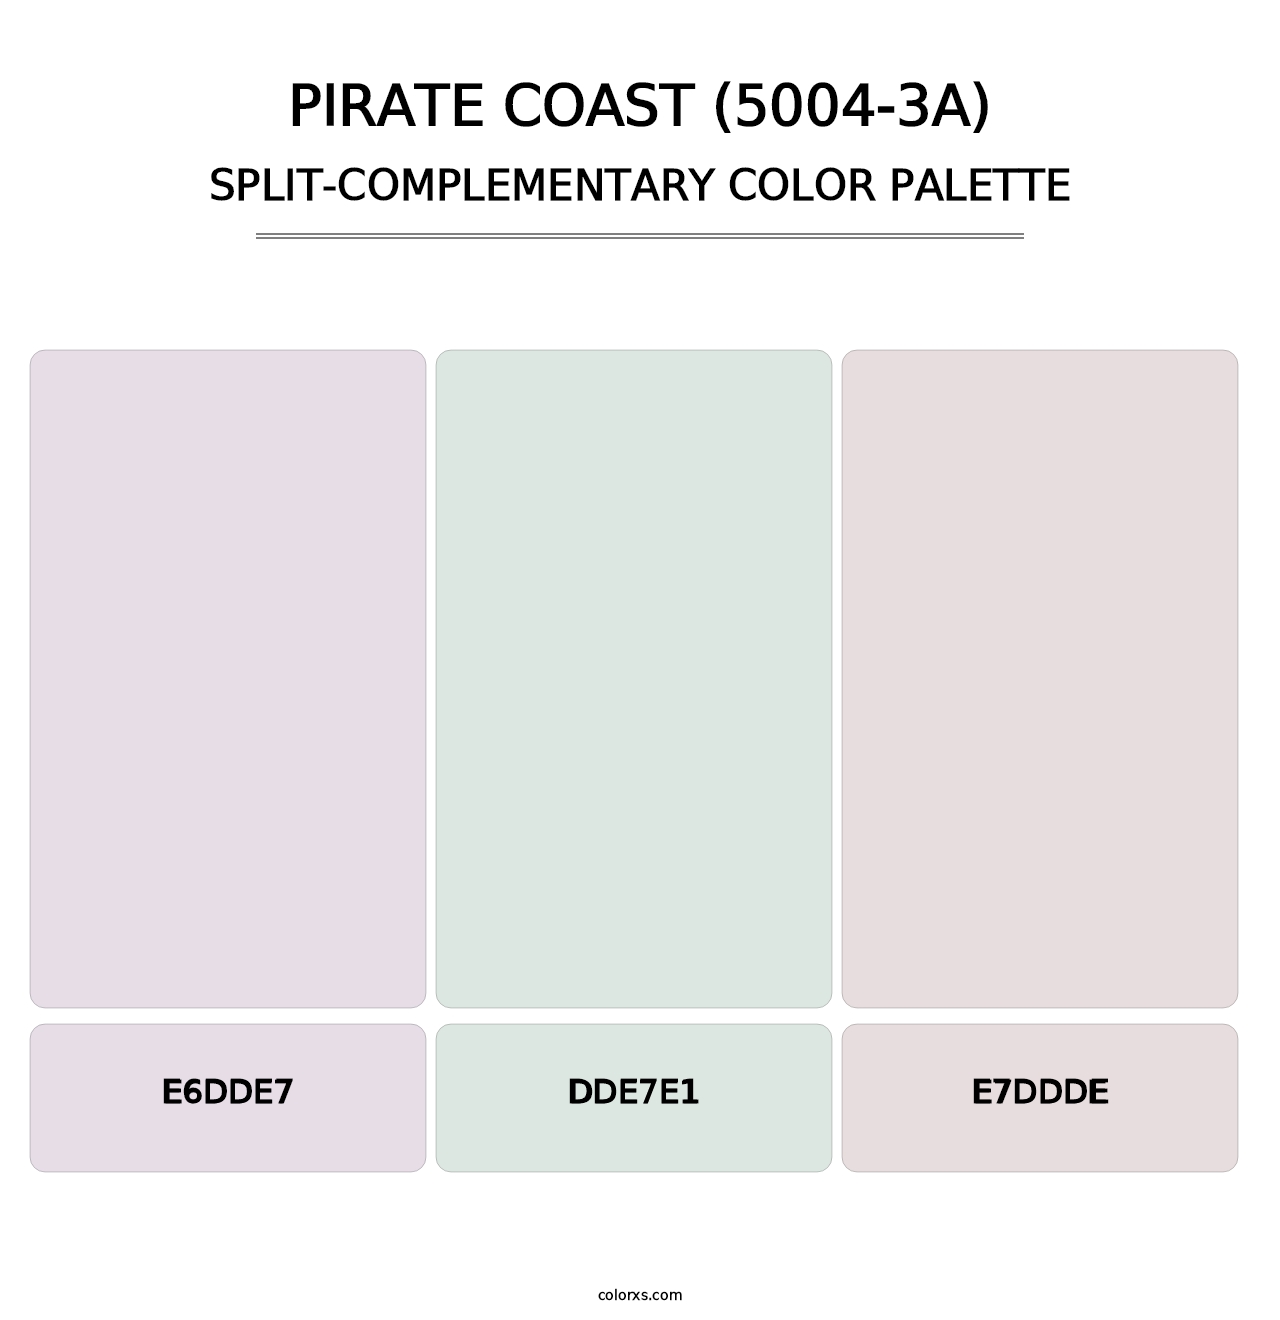 Pirate Coast (5004-3A) - Split-Complementary Color Palette